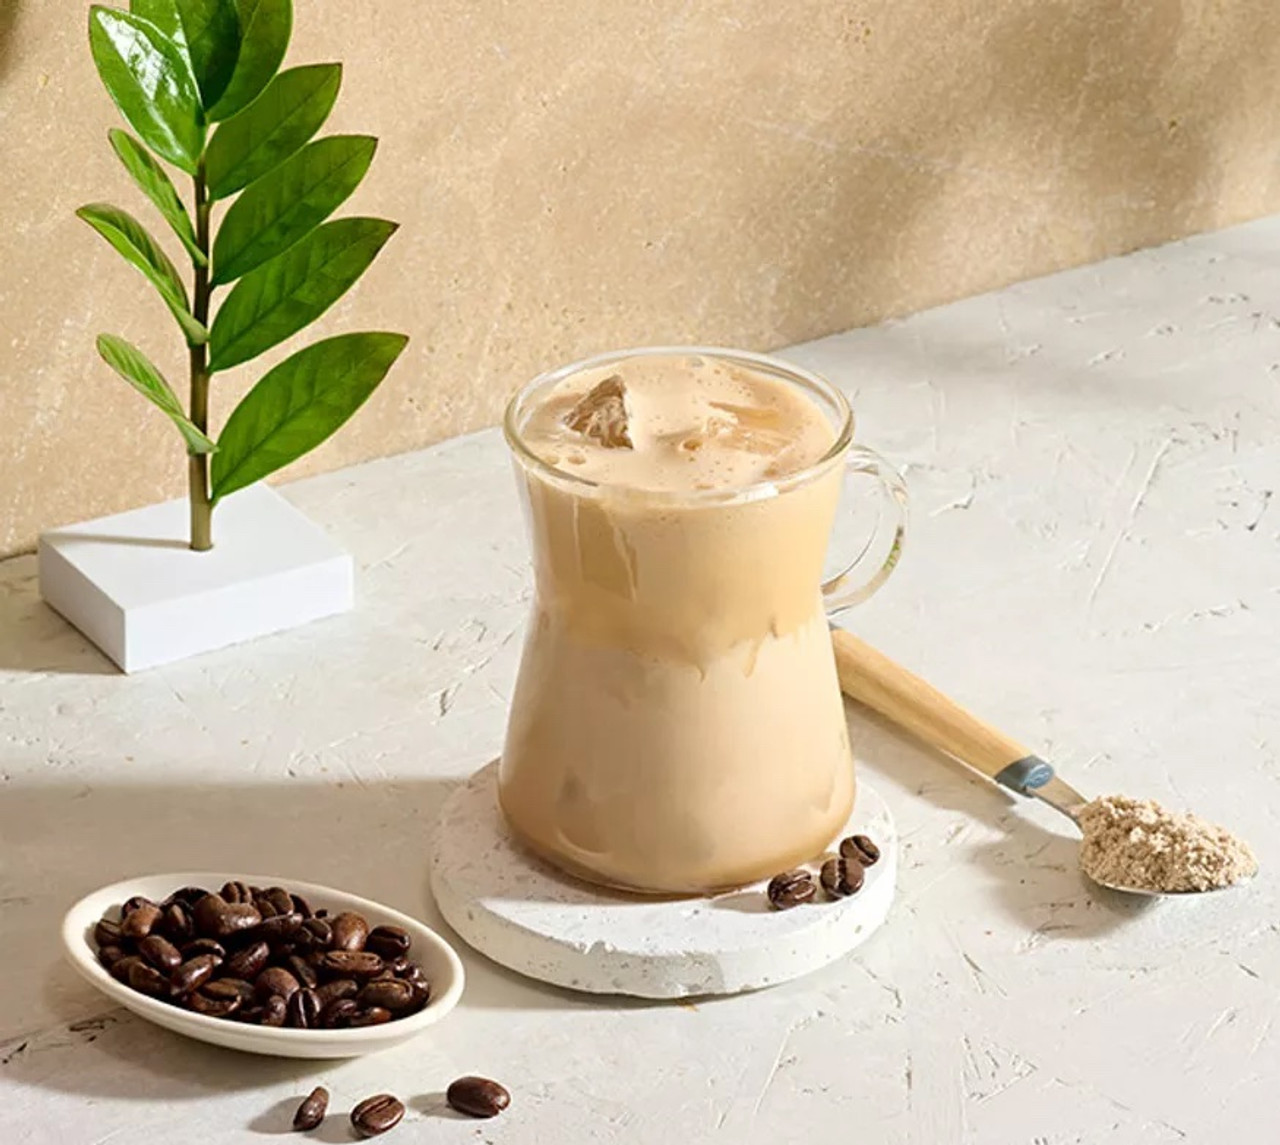 https://cdn11.bigcommerce.com/s-yyr3tzu8q0/images/stencil/1280x1280/products/167/829/pp-high-protein-iced-coffe-latte-macchiato-one__06219.1703928708.jpg?c=2?imbypass=on